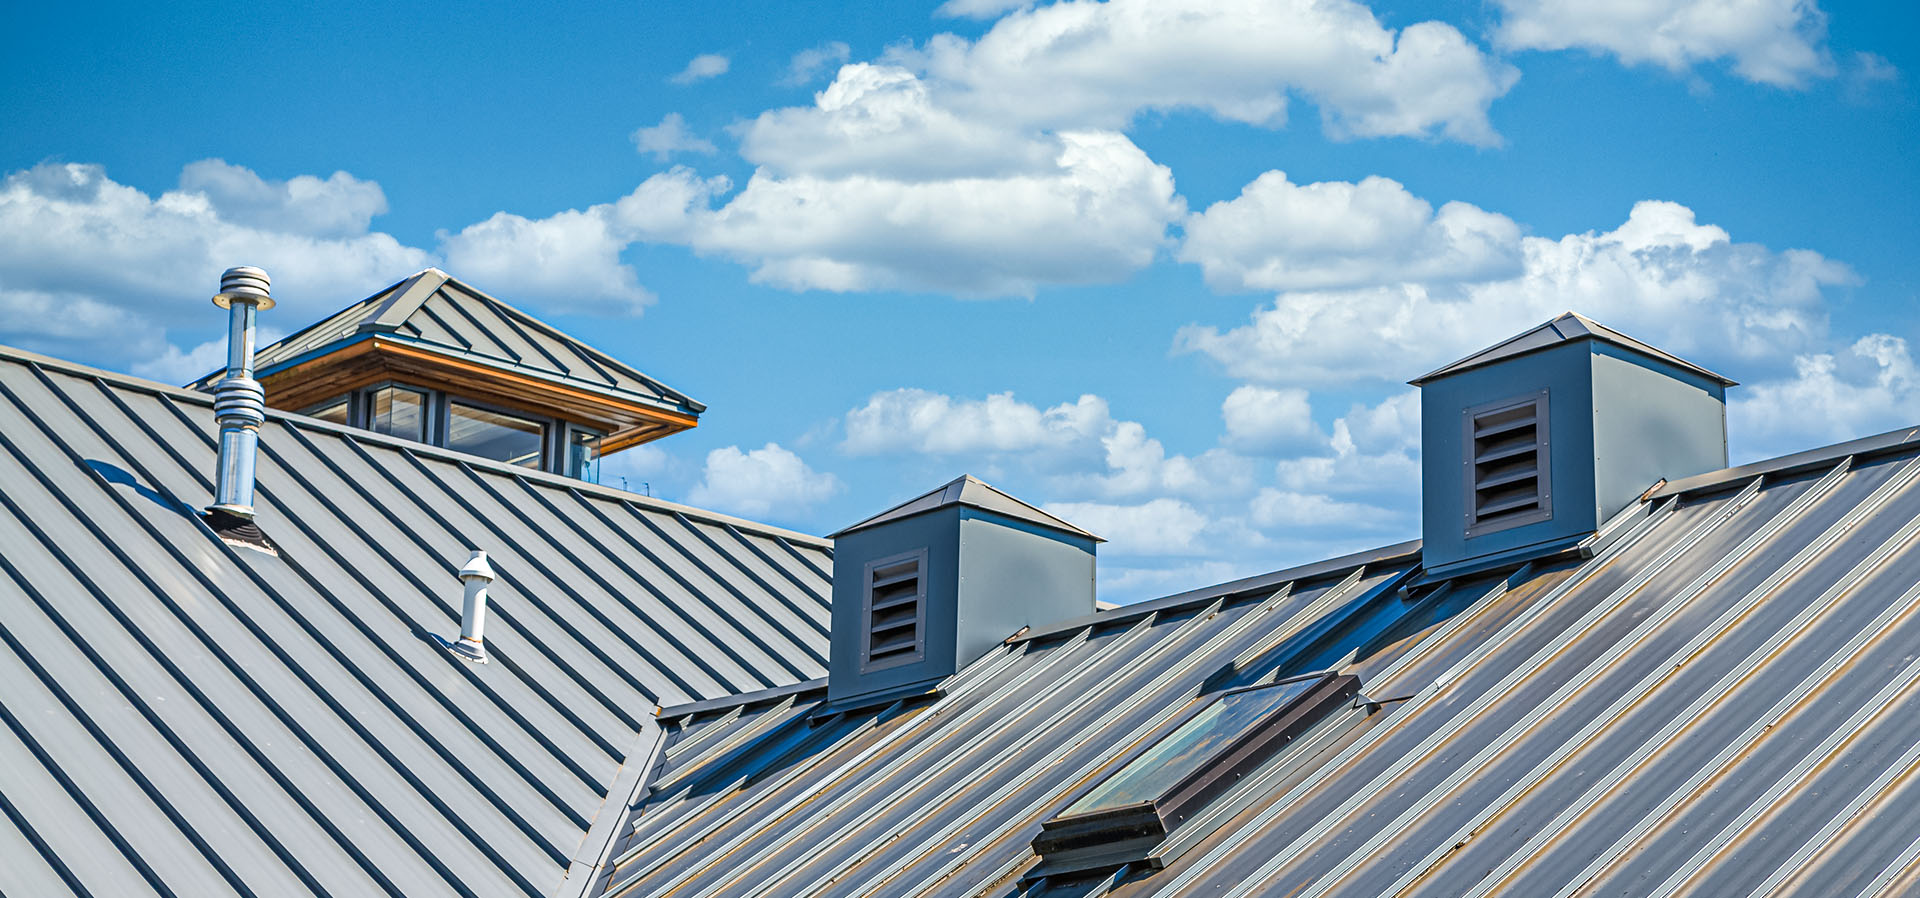 Roofing Warranties: What's Covered And What's Not?